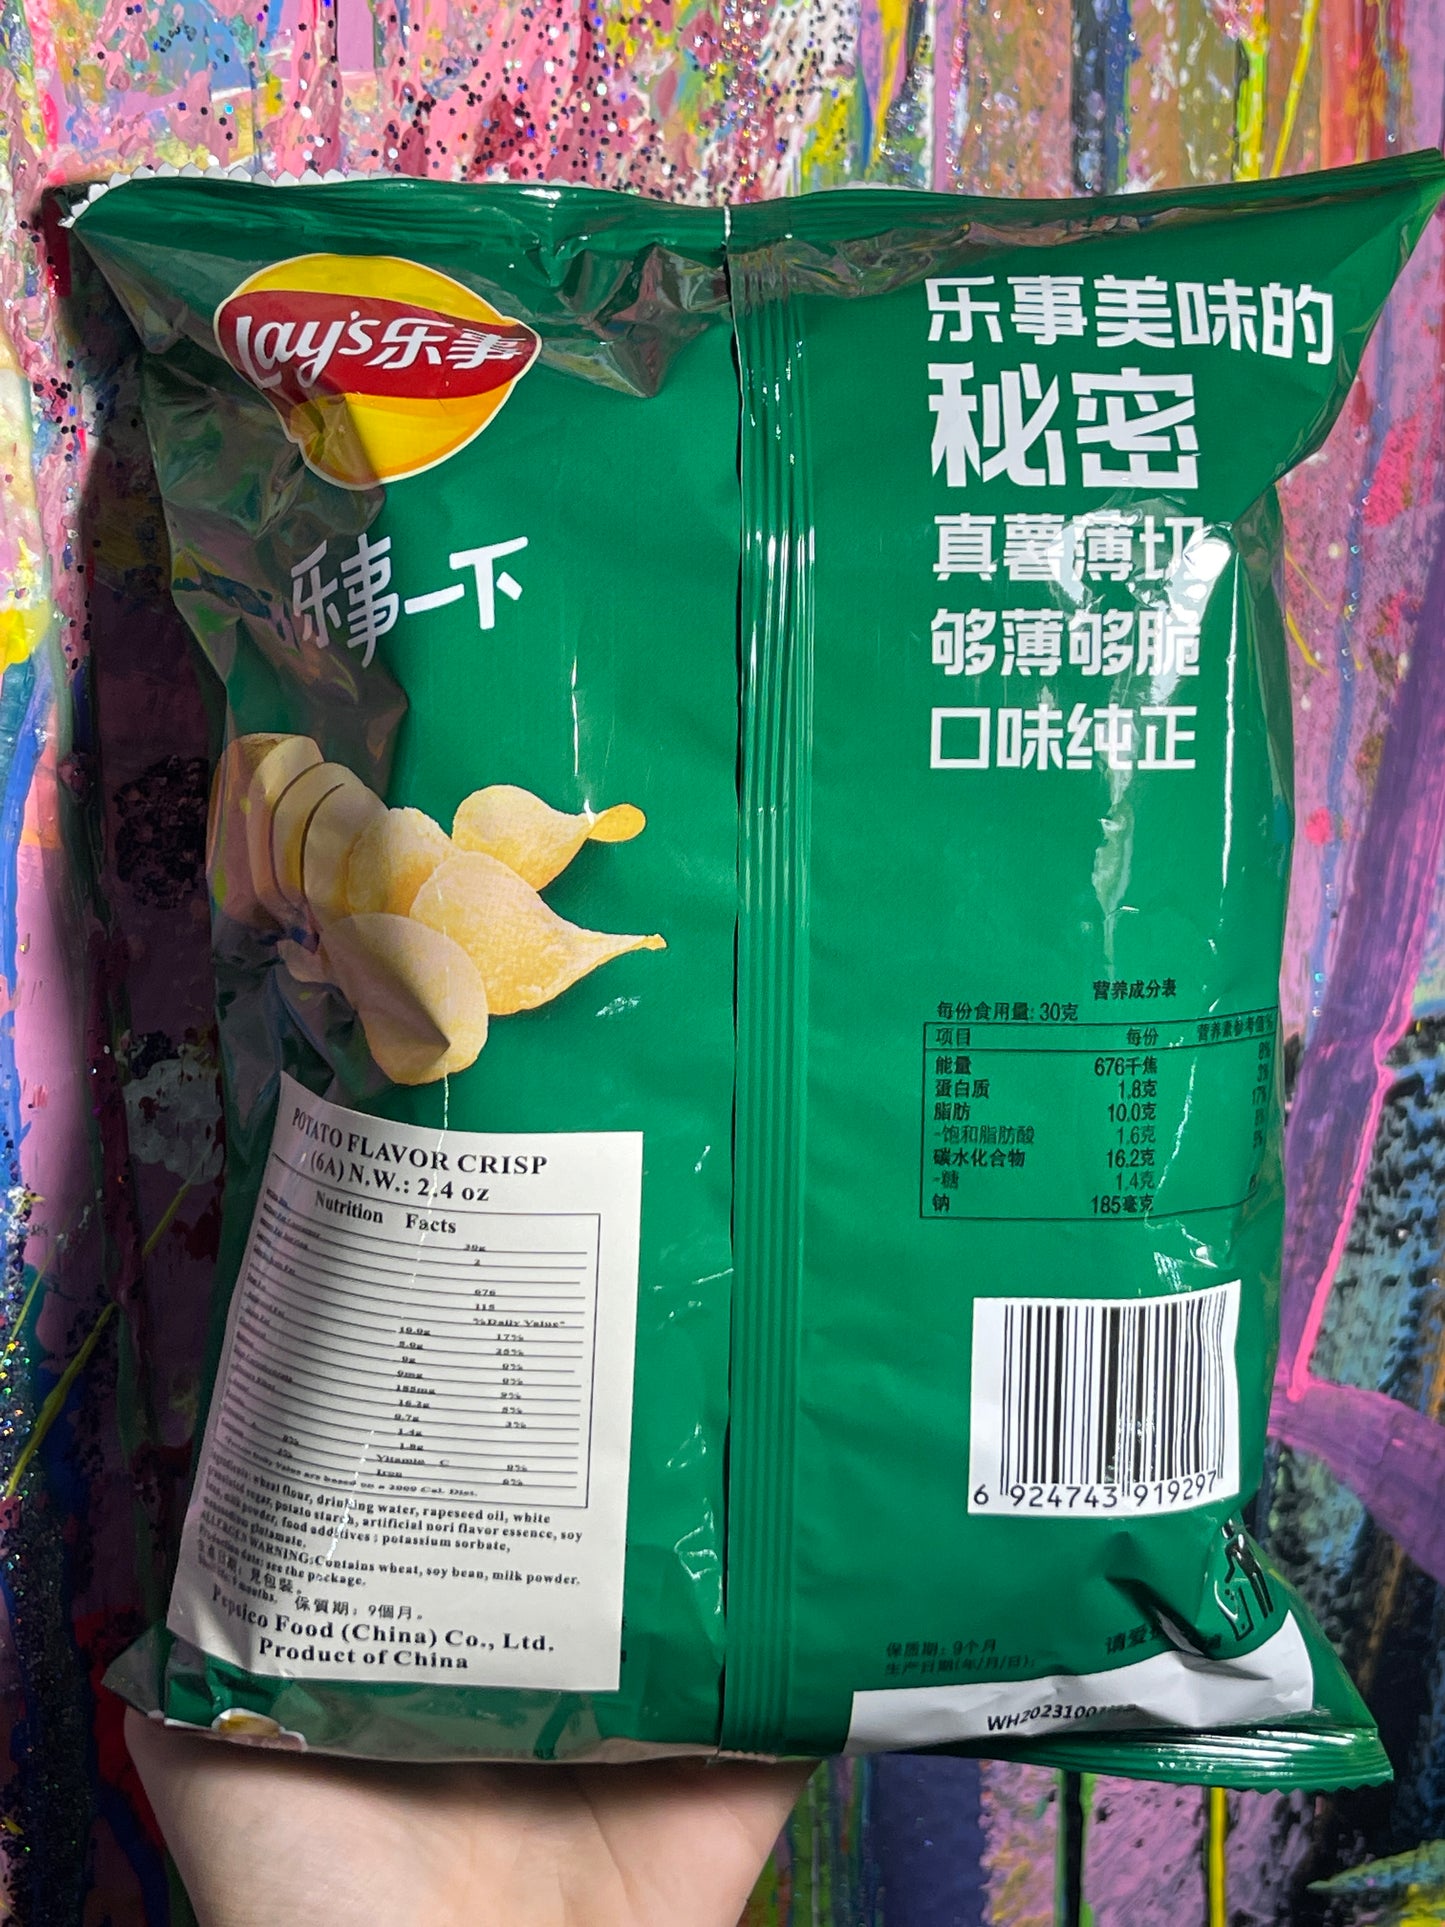 Lay’s Seaweed Flavored Potato Chips